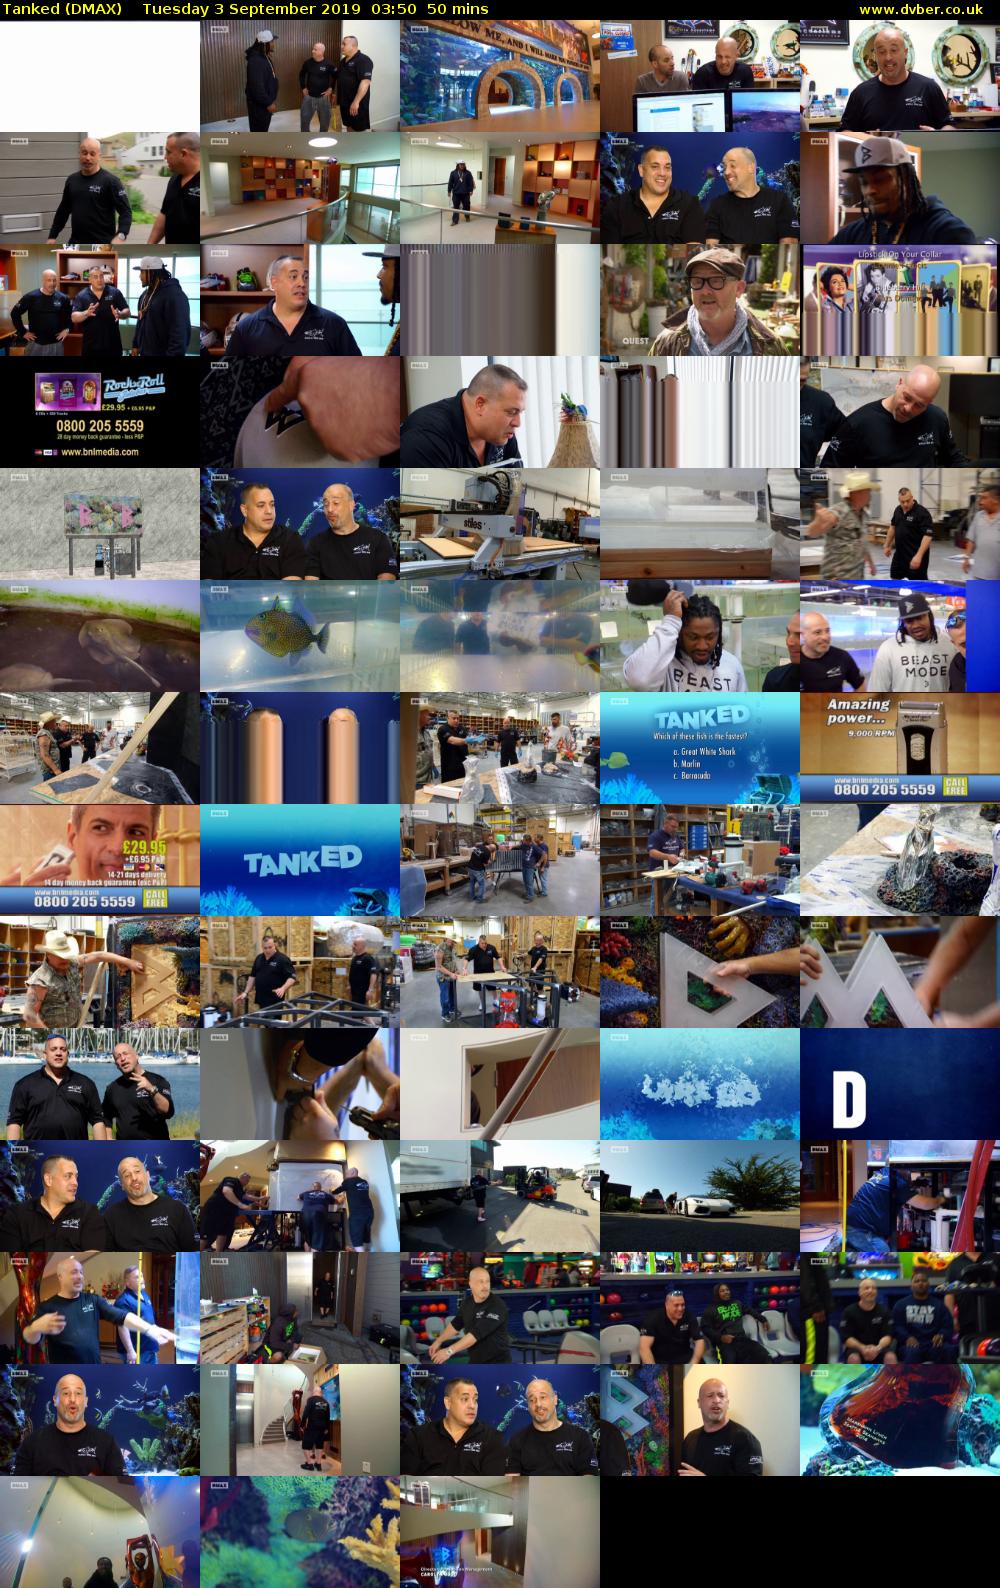 Tanked (DMAX) Tuesday 3 September 2019 03:50 - 04:40